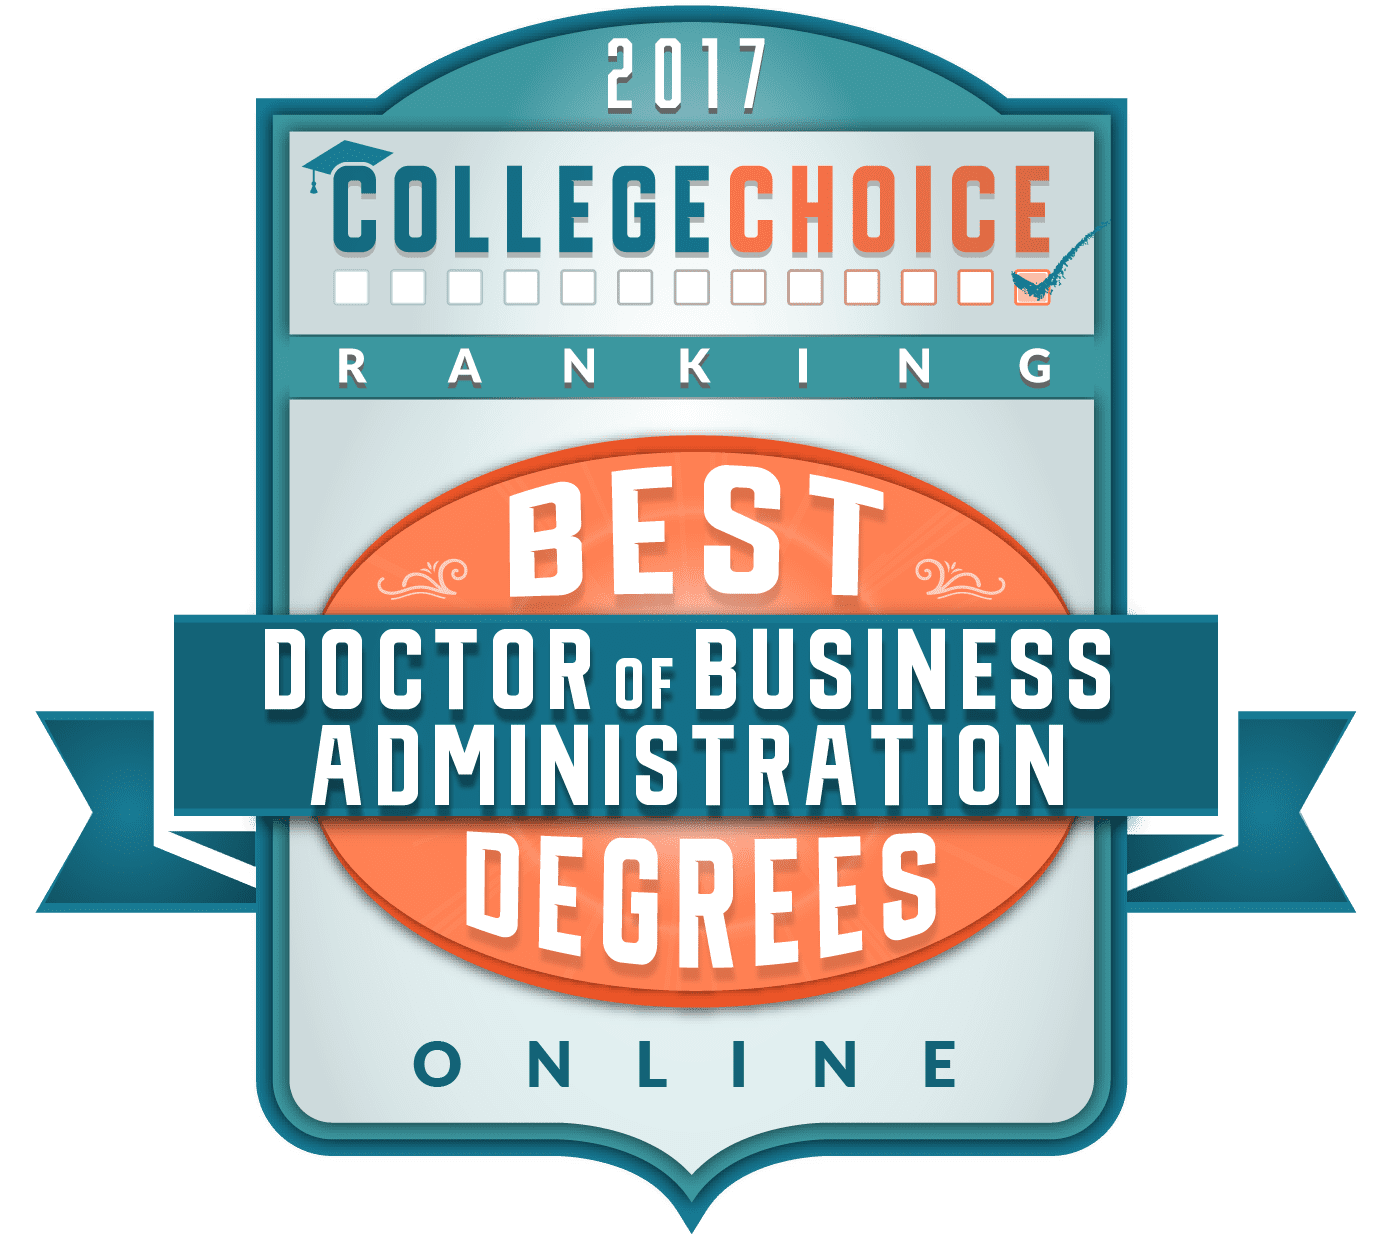 Green and blue badge. "2017" written in white at the top. "Best Degrees" in a circle with "Doctor of Business Administration" centered. "Online" at the bottom of badge.